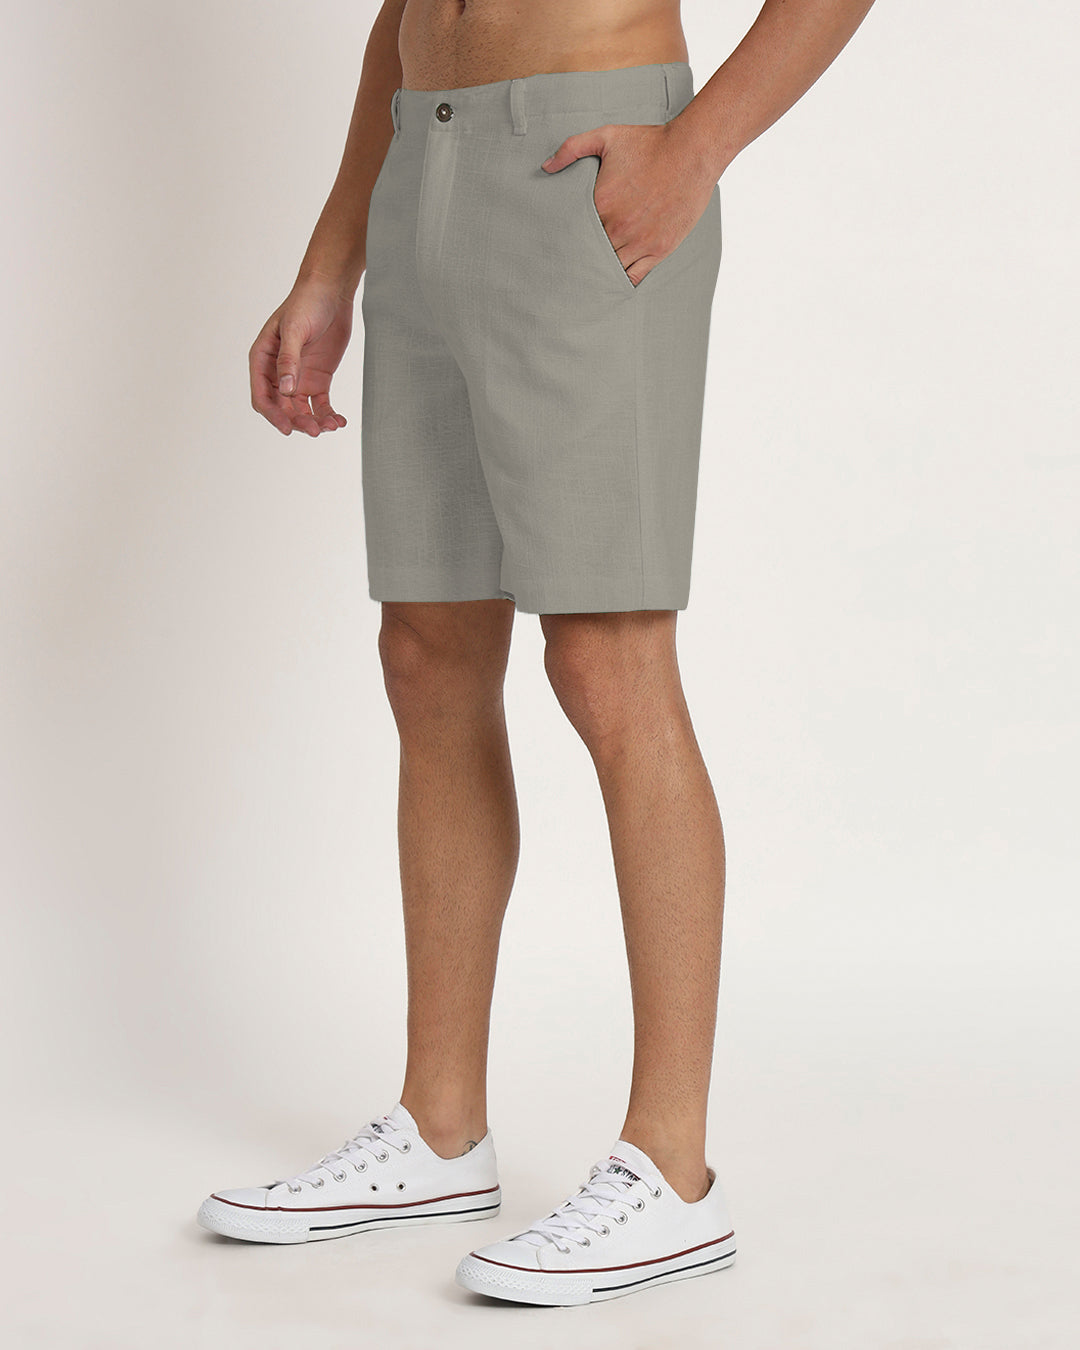 Combo : Ready For Anything Olive Green & Grey Men's Shorts